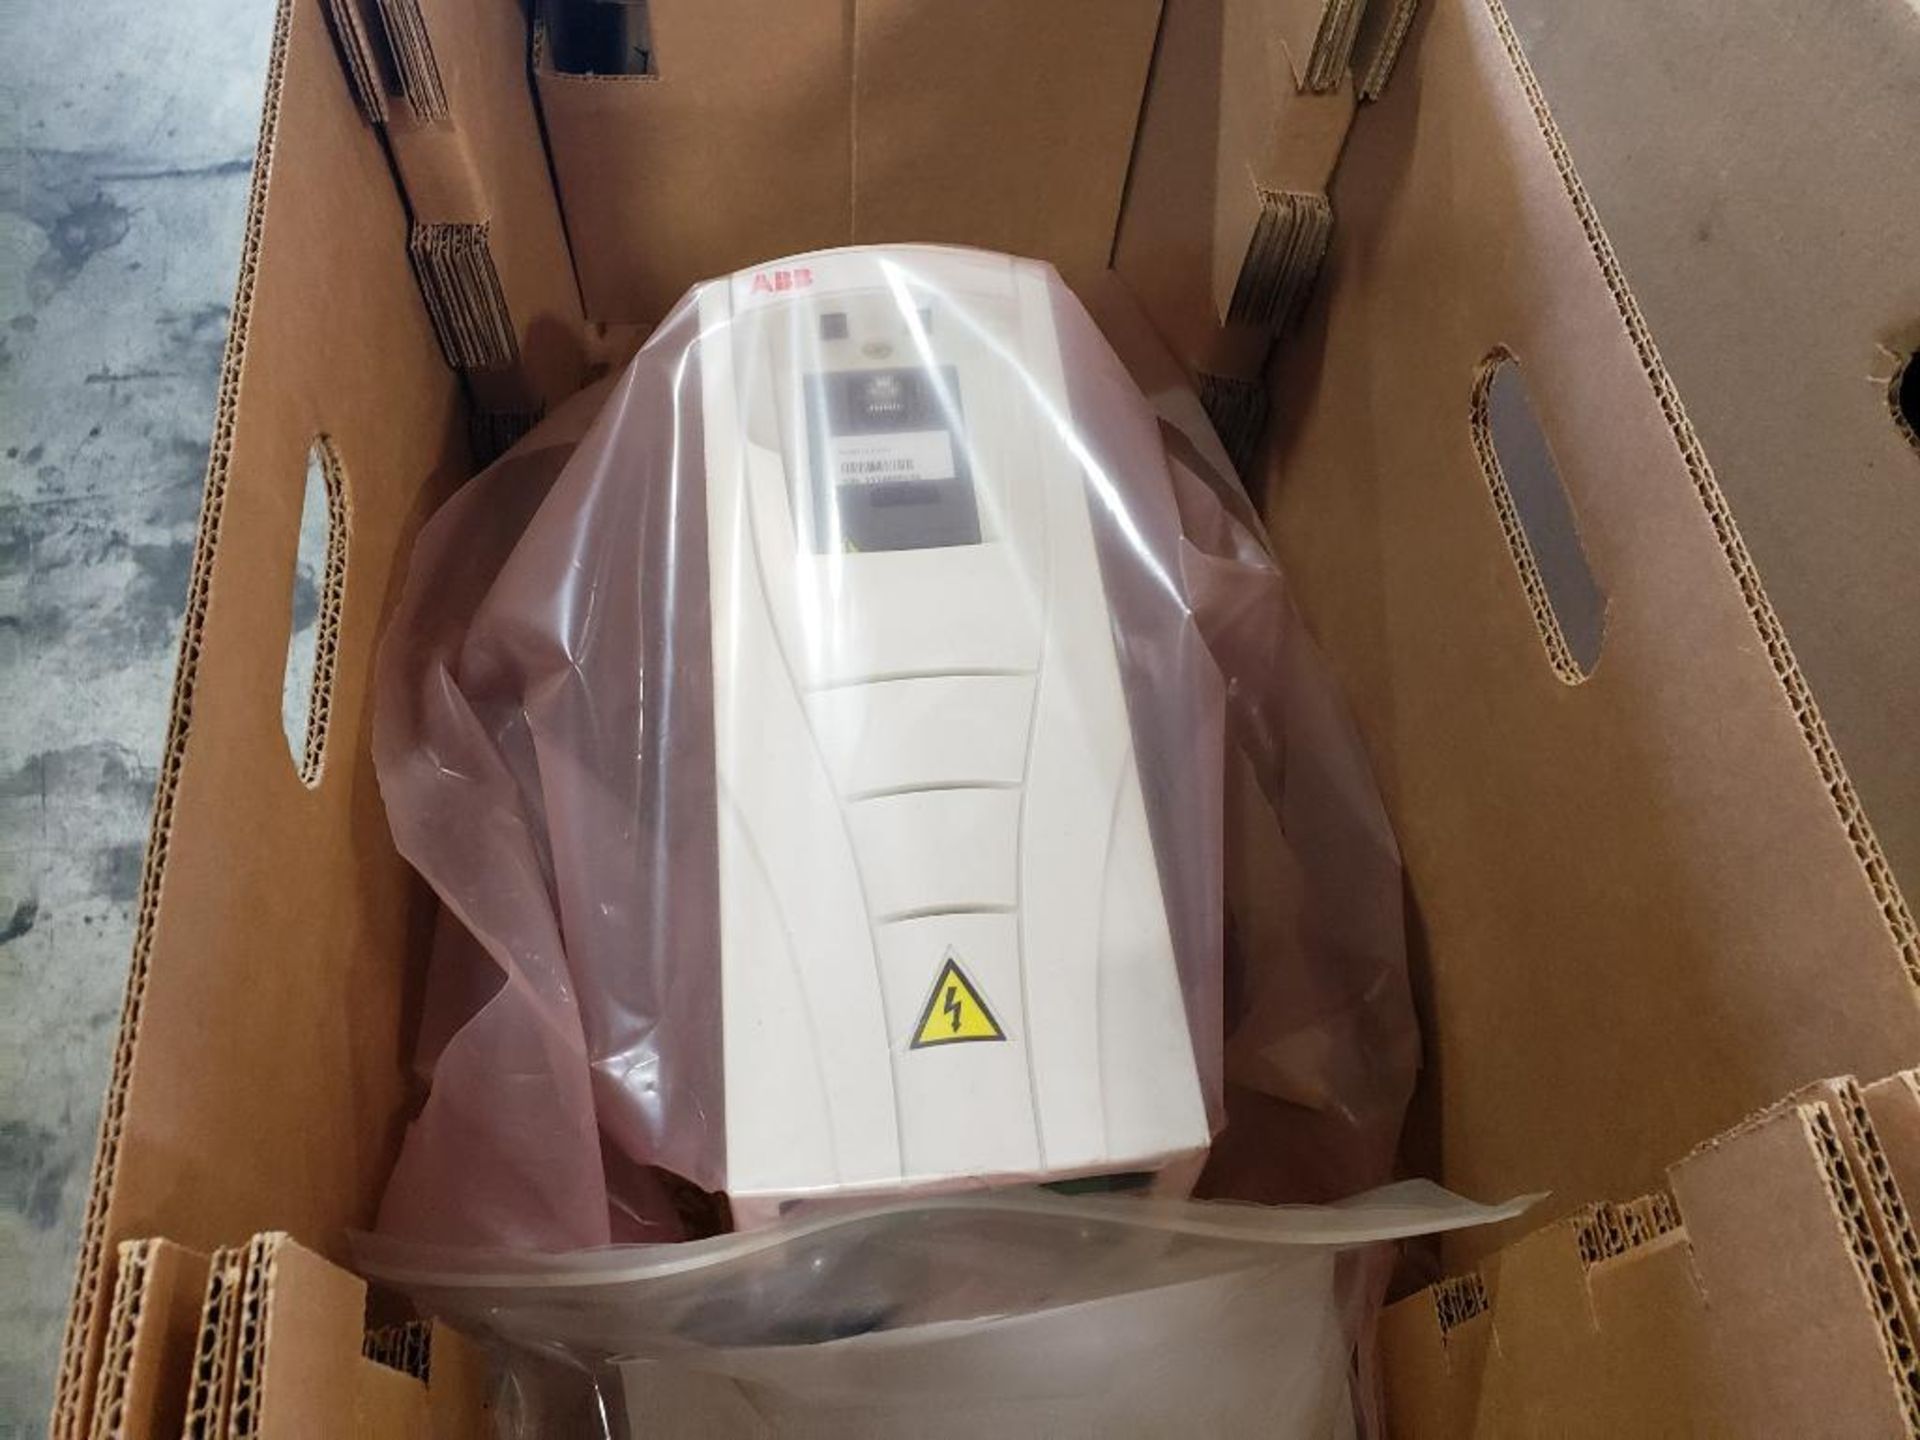 ABB ACS550-U1-03A3-4 wall mount drive. 1.5HP, 1.1kW, 280-480V. New in box. - Image 4 of 11